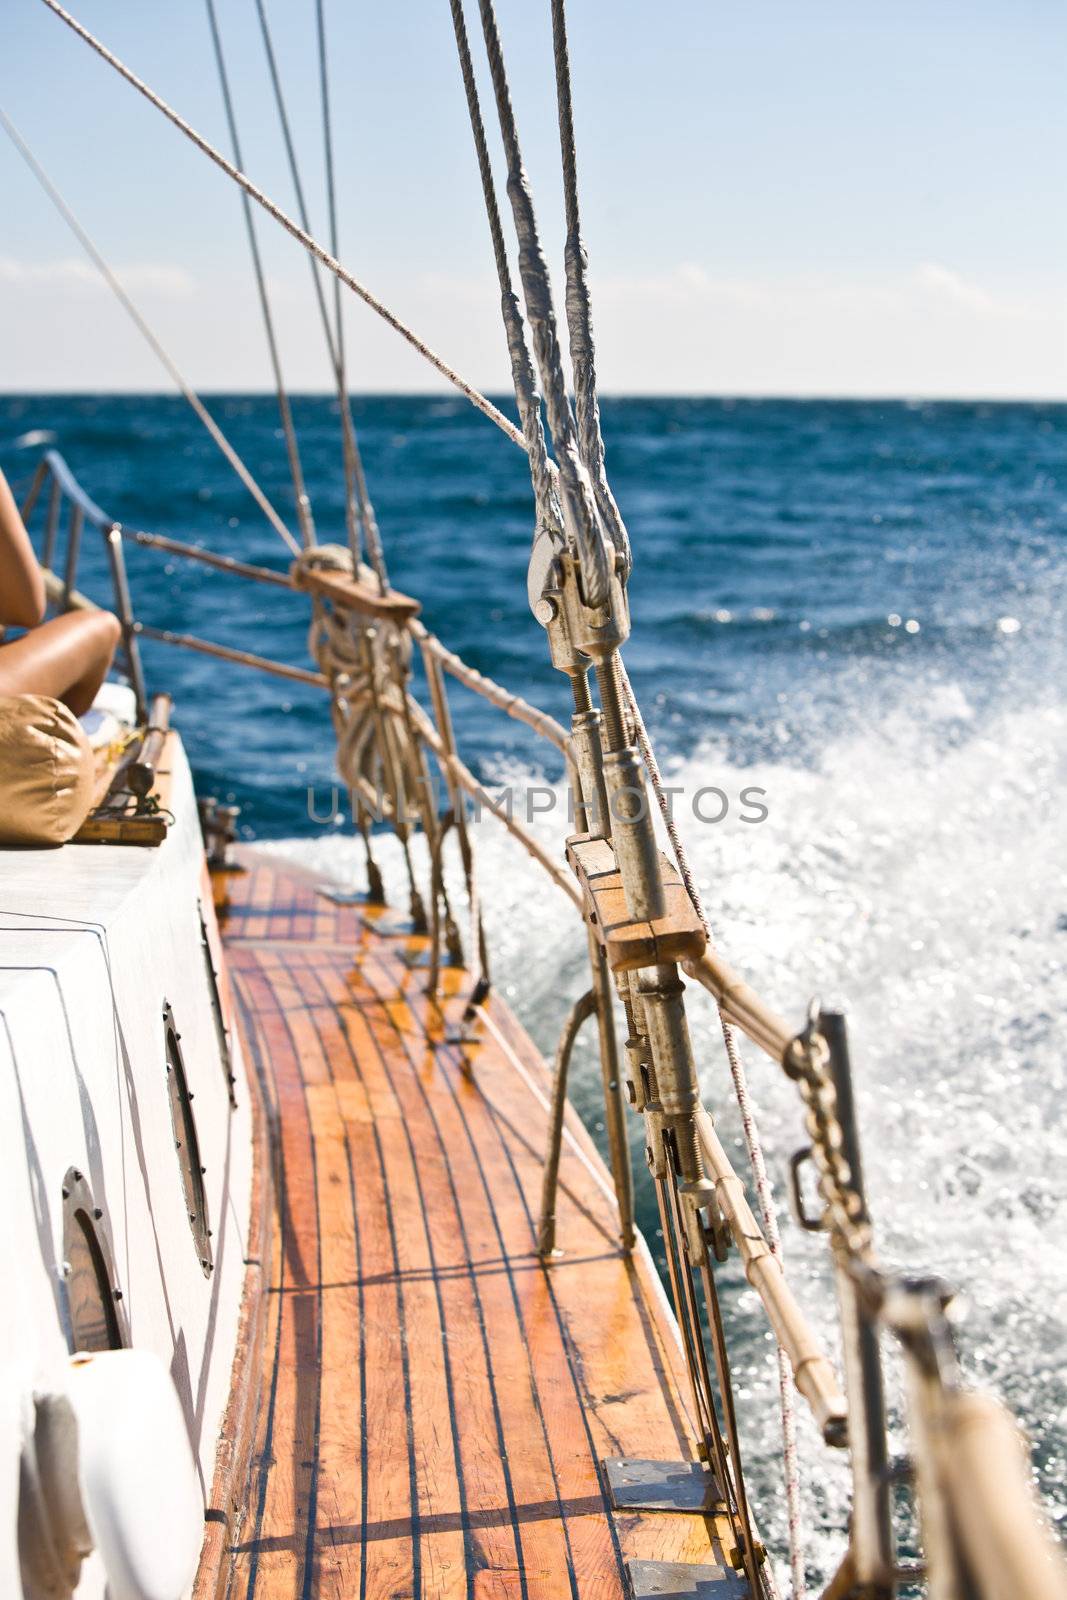 summer series: modern wooden yacht in the sea. Deck view